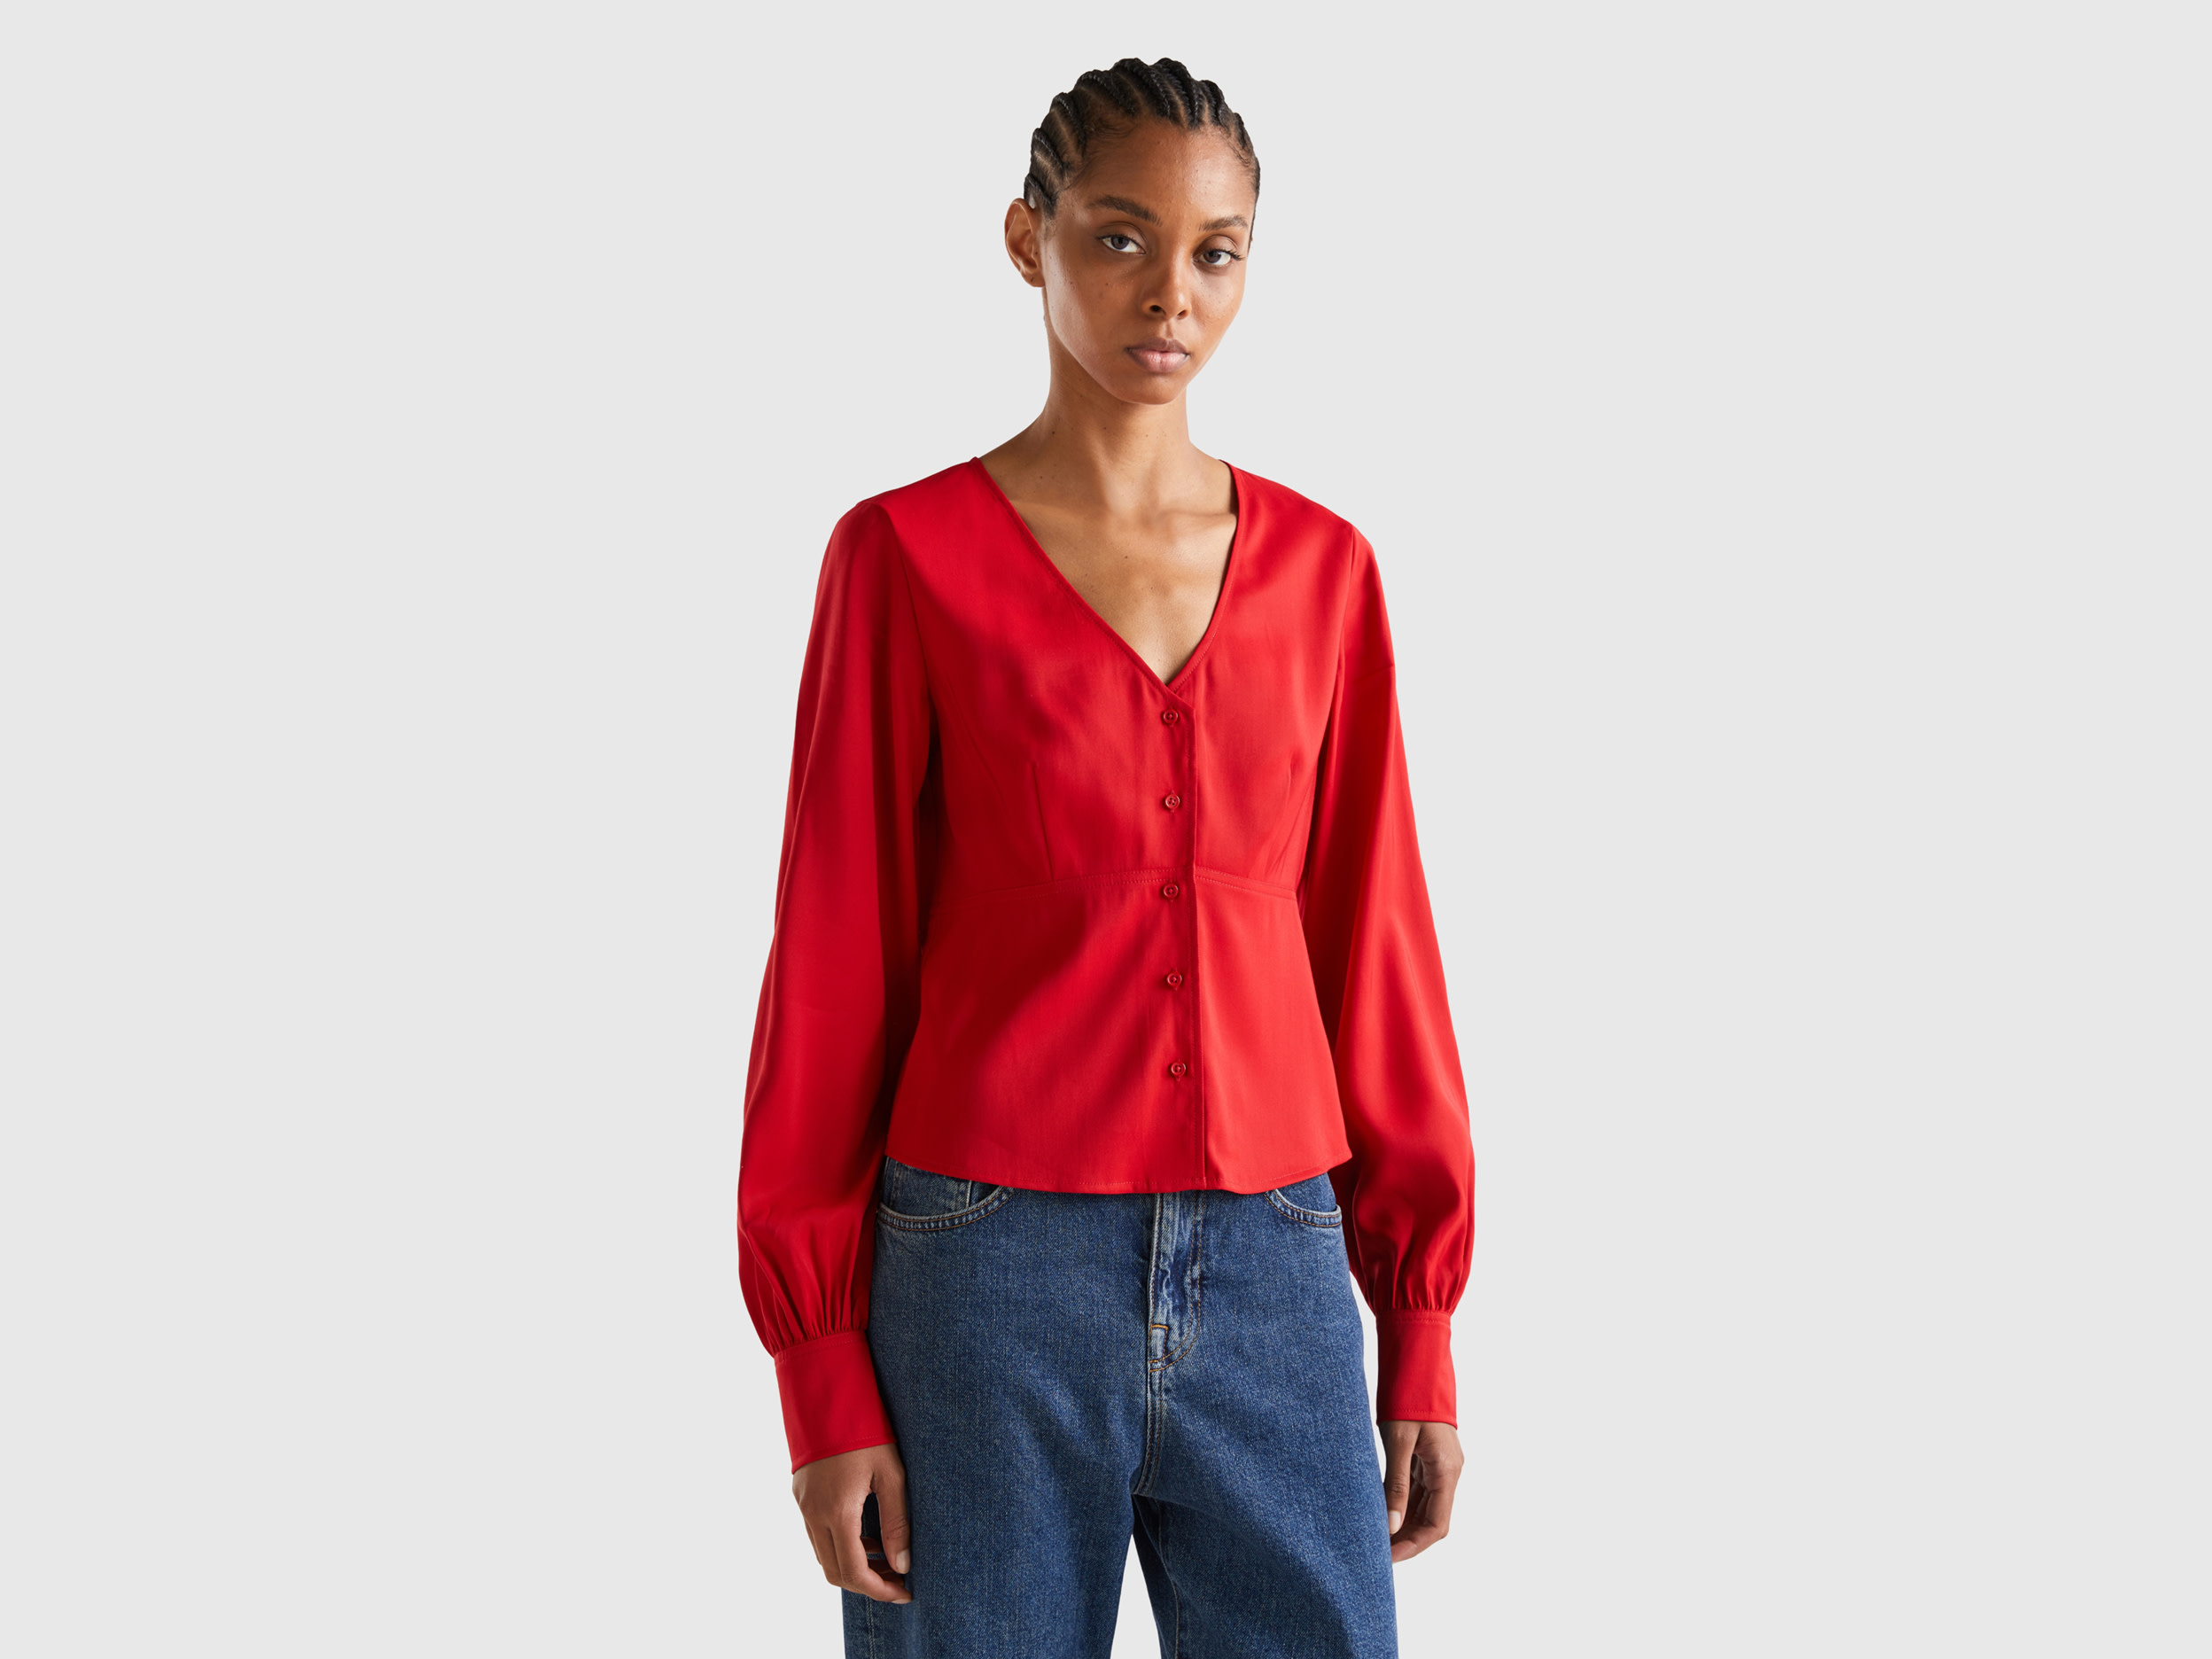 Benetton, V-neck Shirt In 100% Cotton, size L, Red, Women